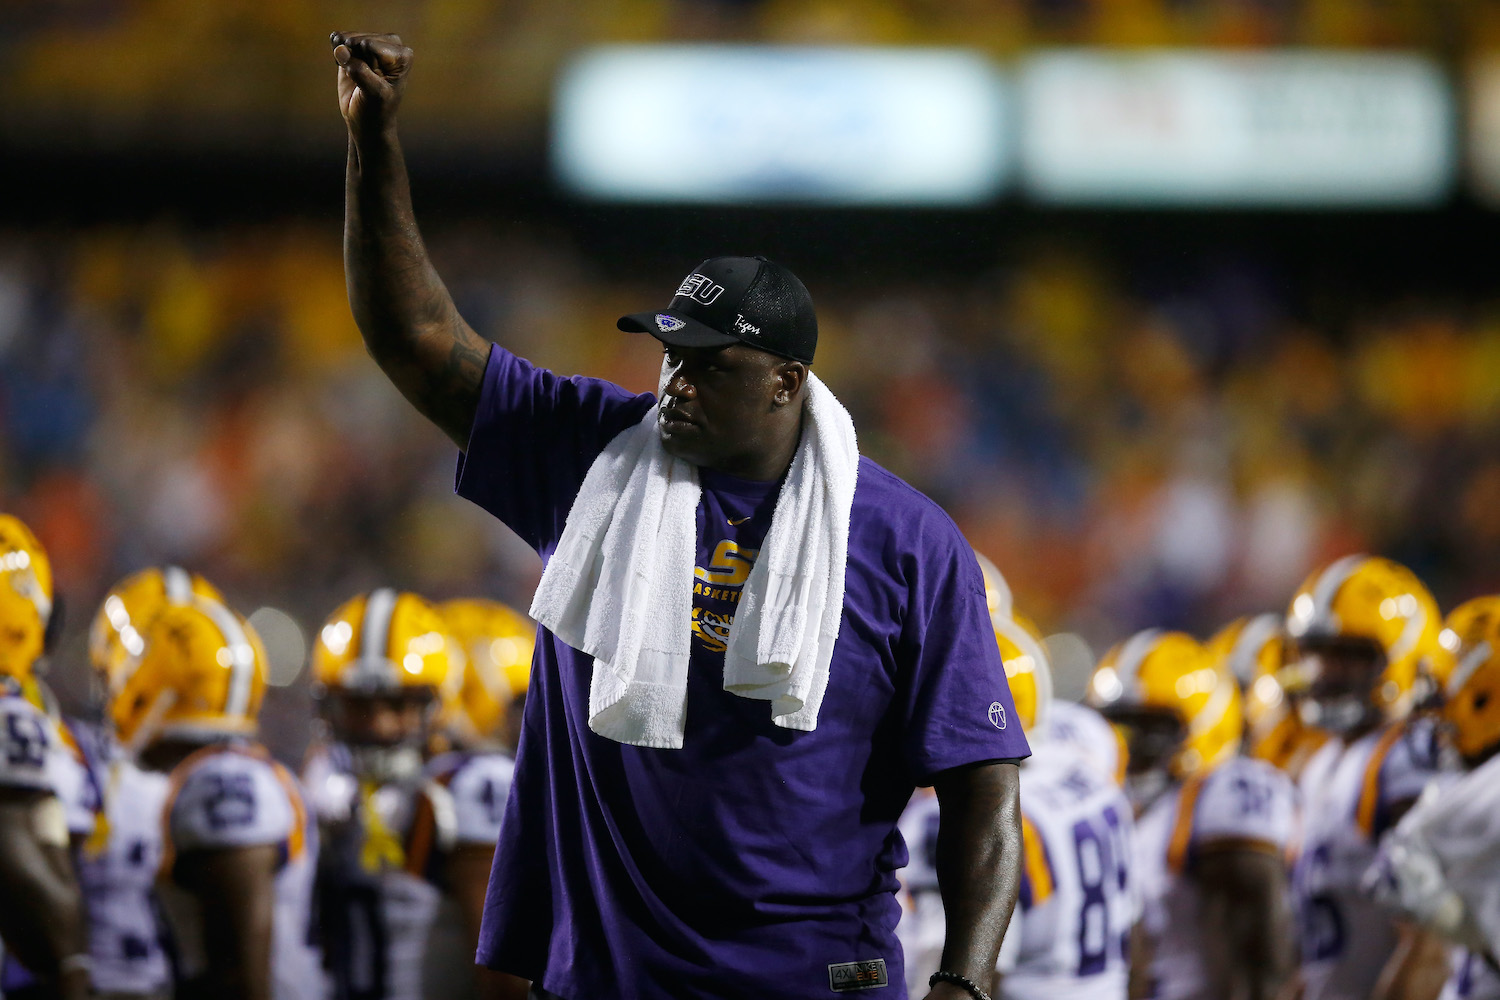 NBA legend Shaquille O'Neal returns to his alma mater, LSU.